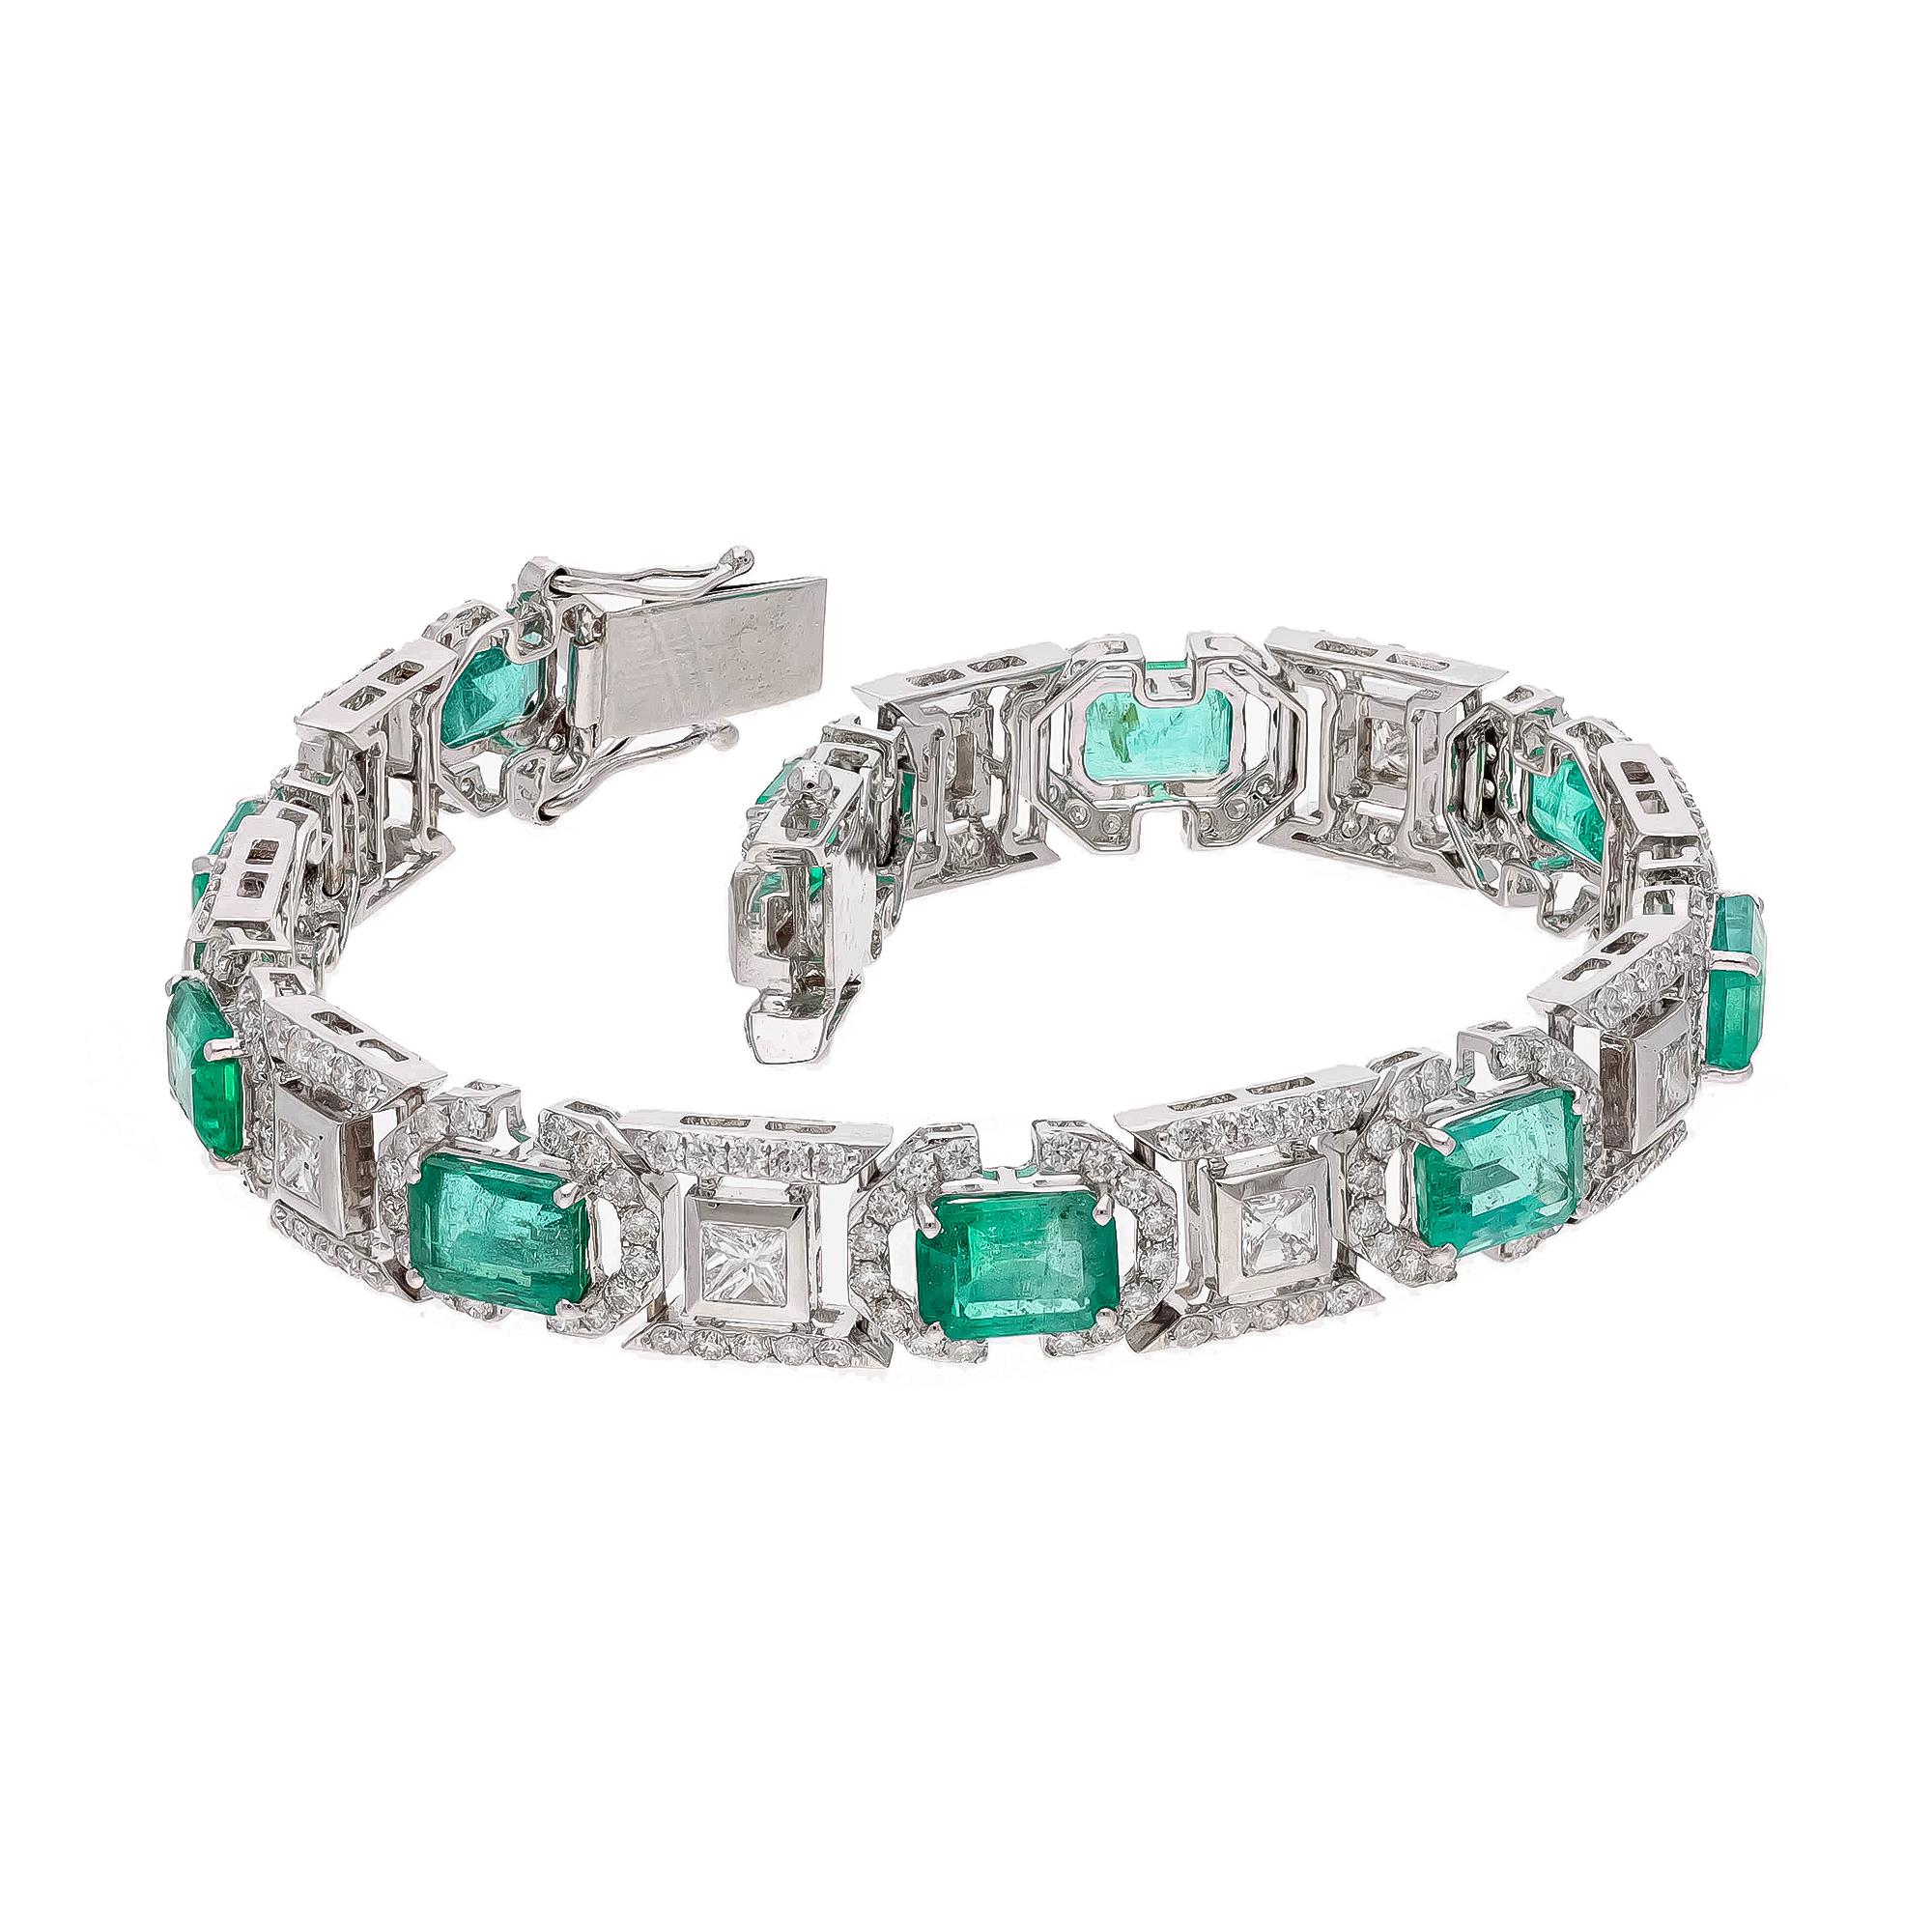 This is a wonderful natural Zambian Emerald tennis bracelet. it has very high quality emeralds and very good quality diamonds ( vsi ) clarity and G Colour .

Emerald: 9.89 carats

diamonds : 4.64 carats ( rounds and princess cuts)

gold : 17.60 gms